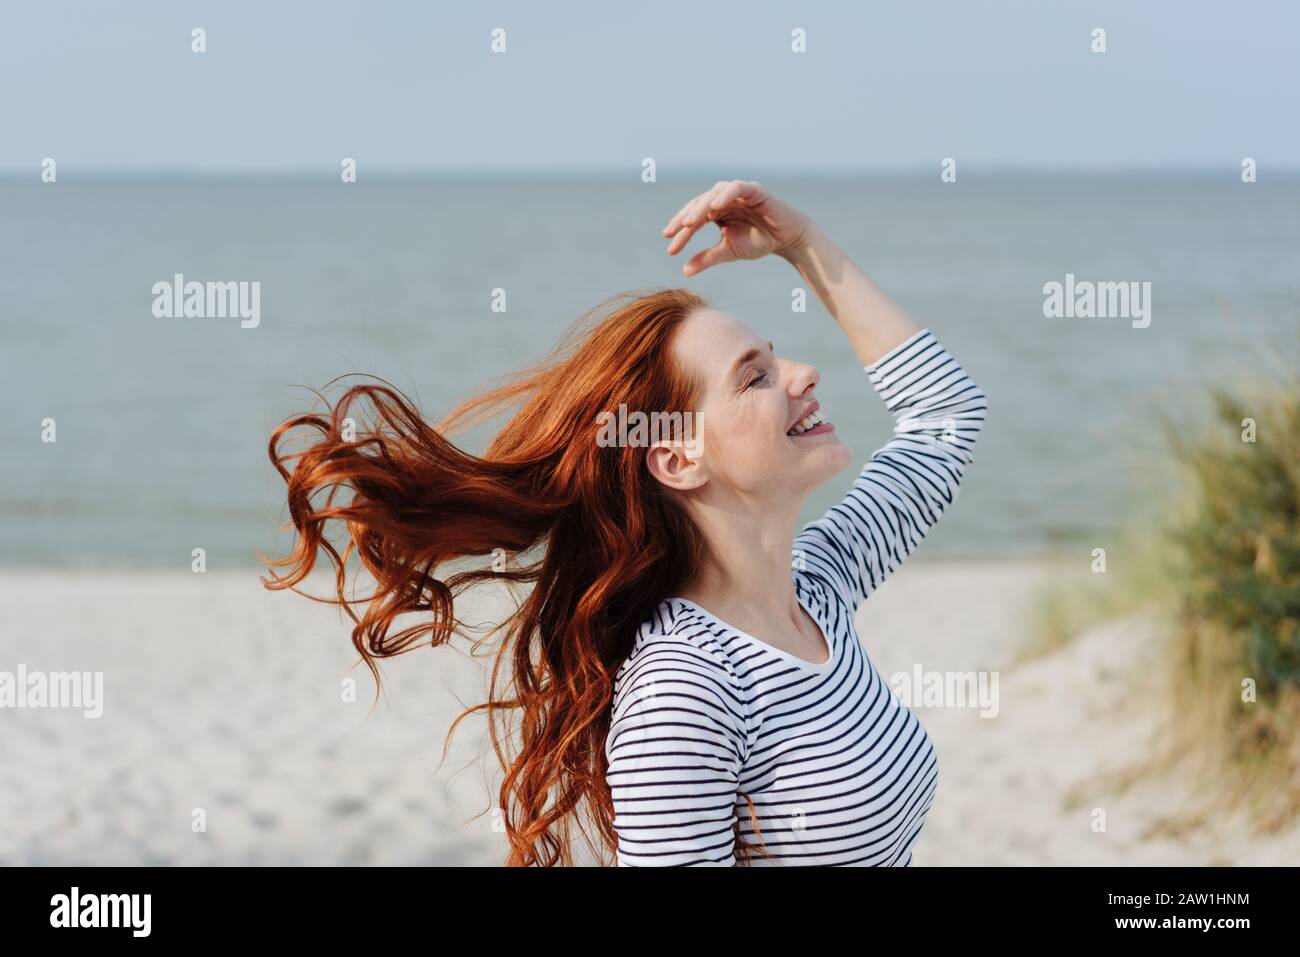 Carefree young woman tossing her long red hair with a happy smile in late evening sun on a winter beach with ocean backdrop Stock Photo